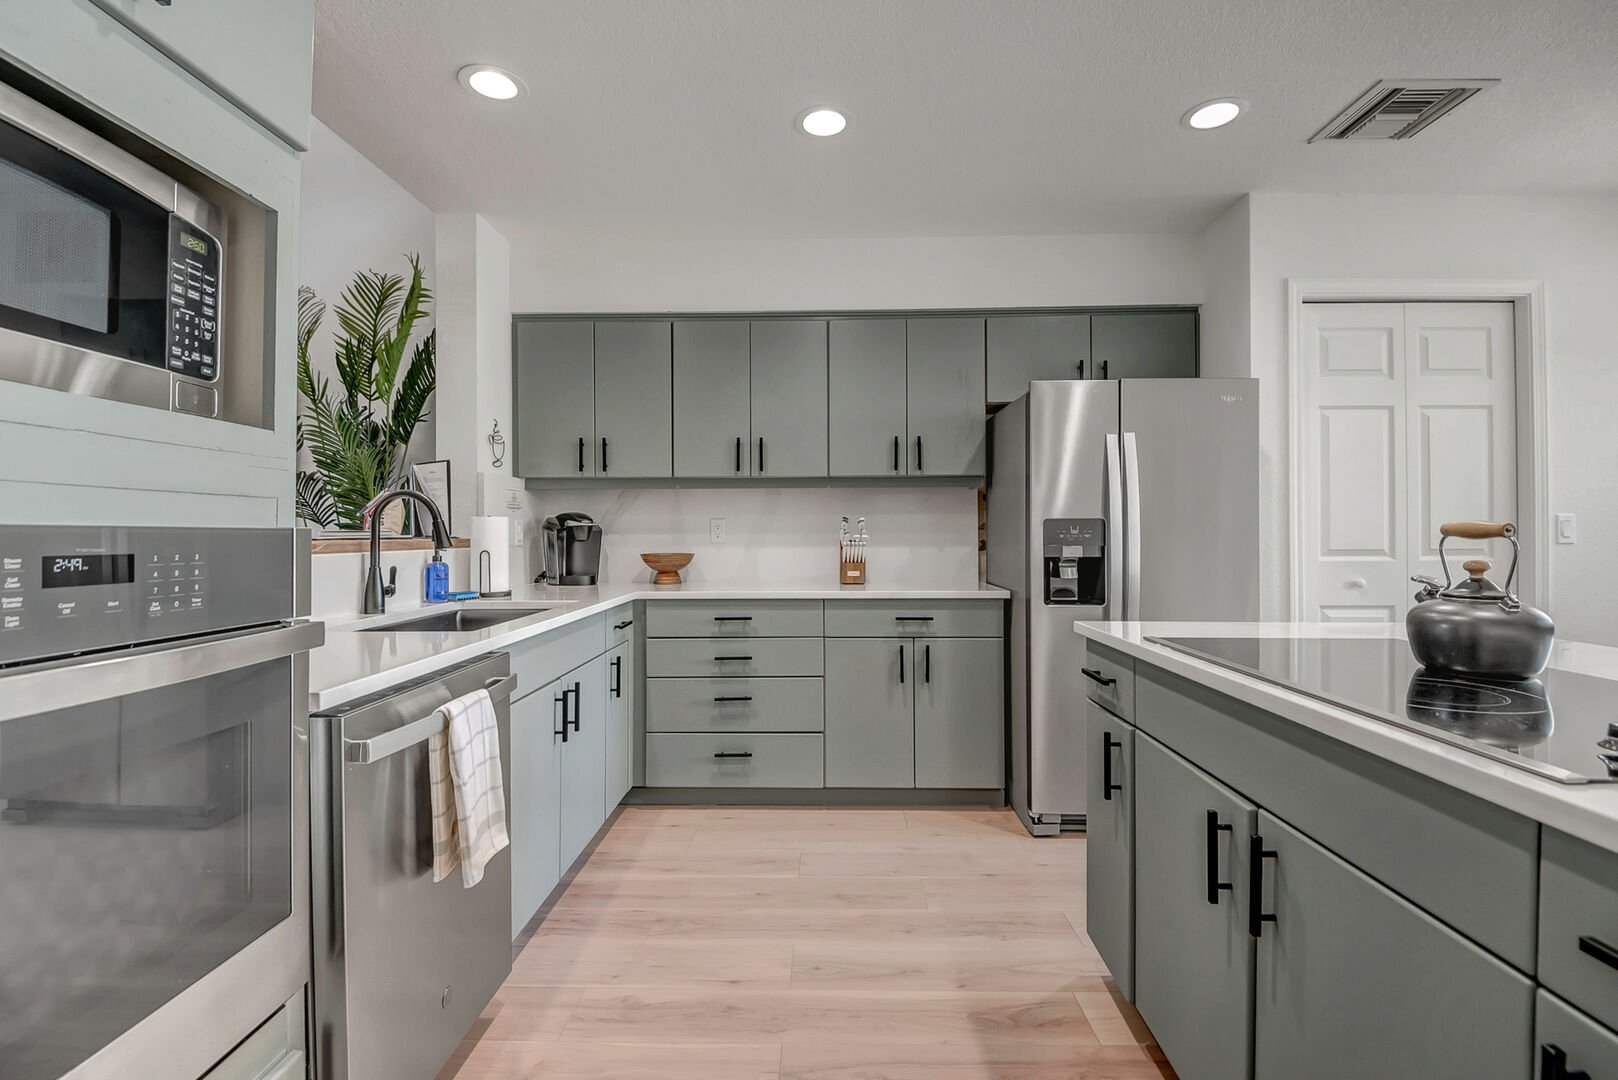 Fully remodeled kitchen is equipped with stainless steel appliances